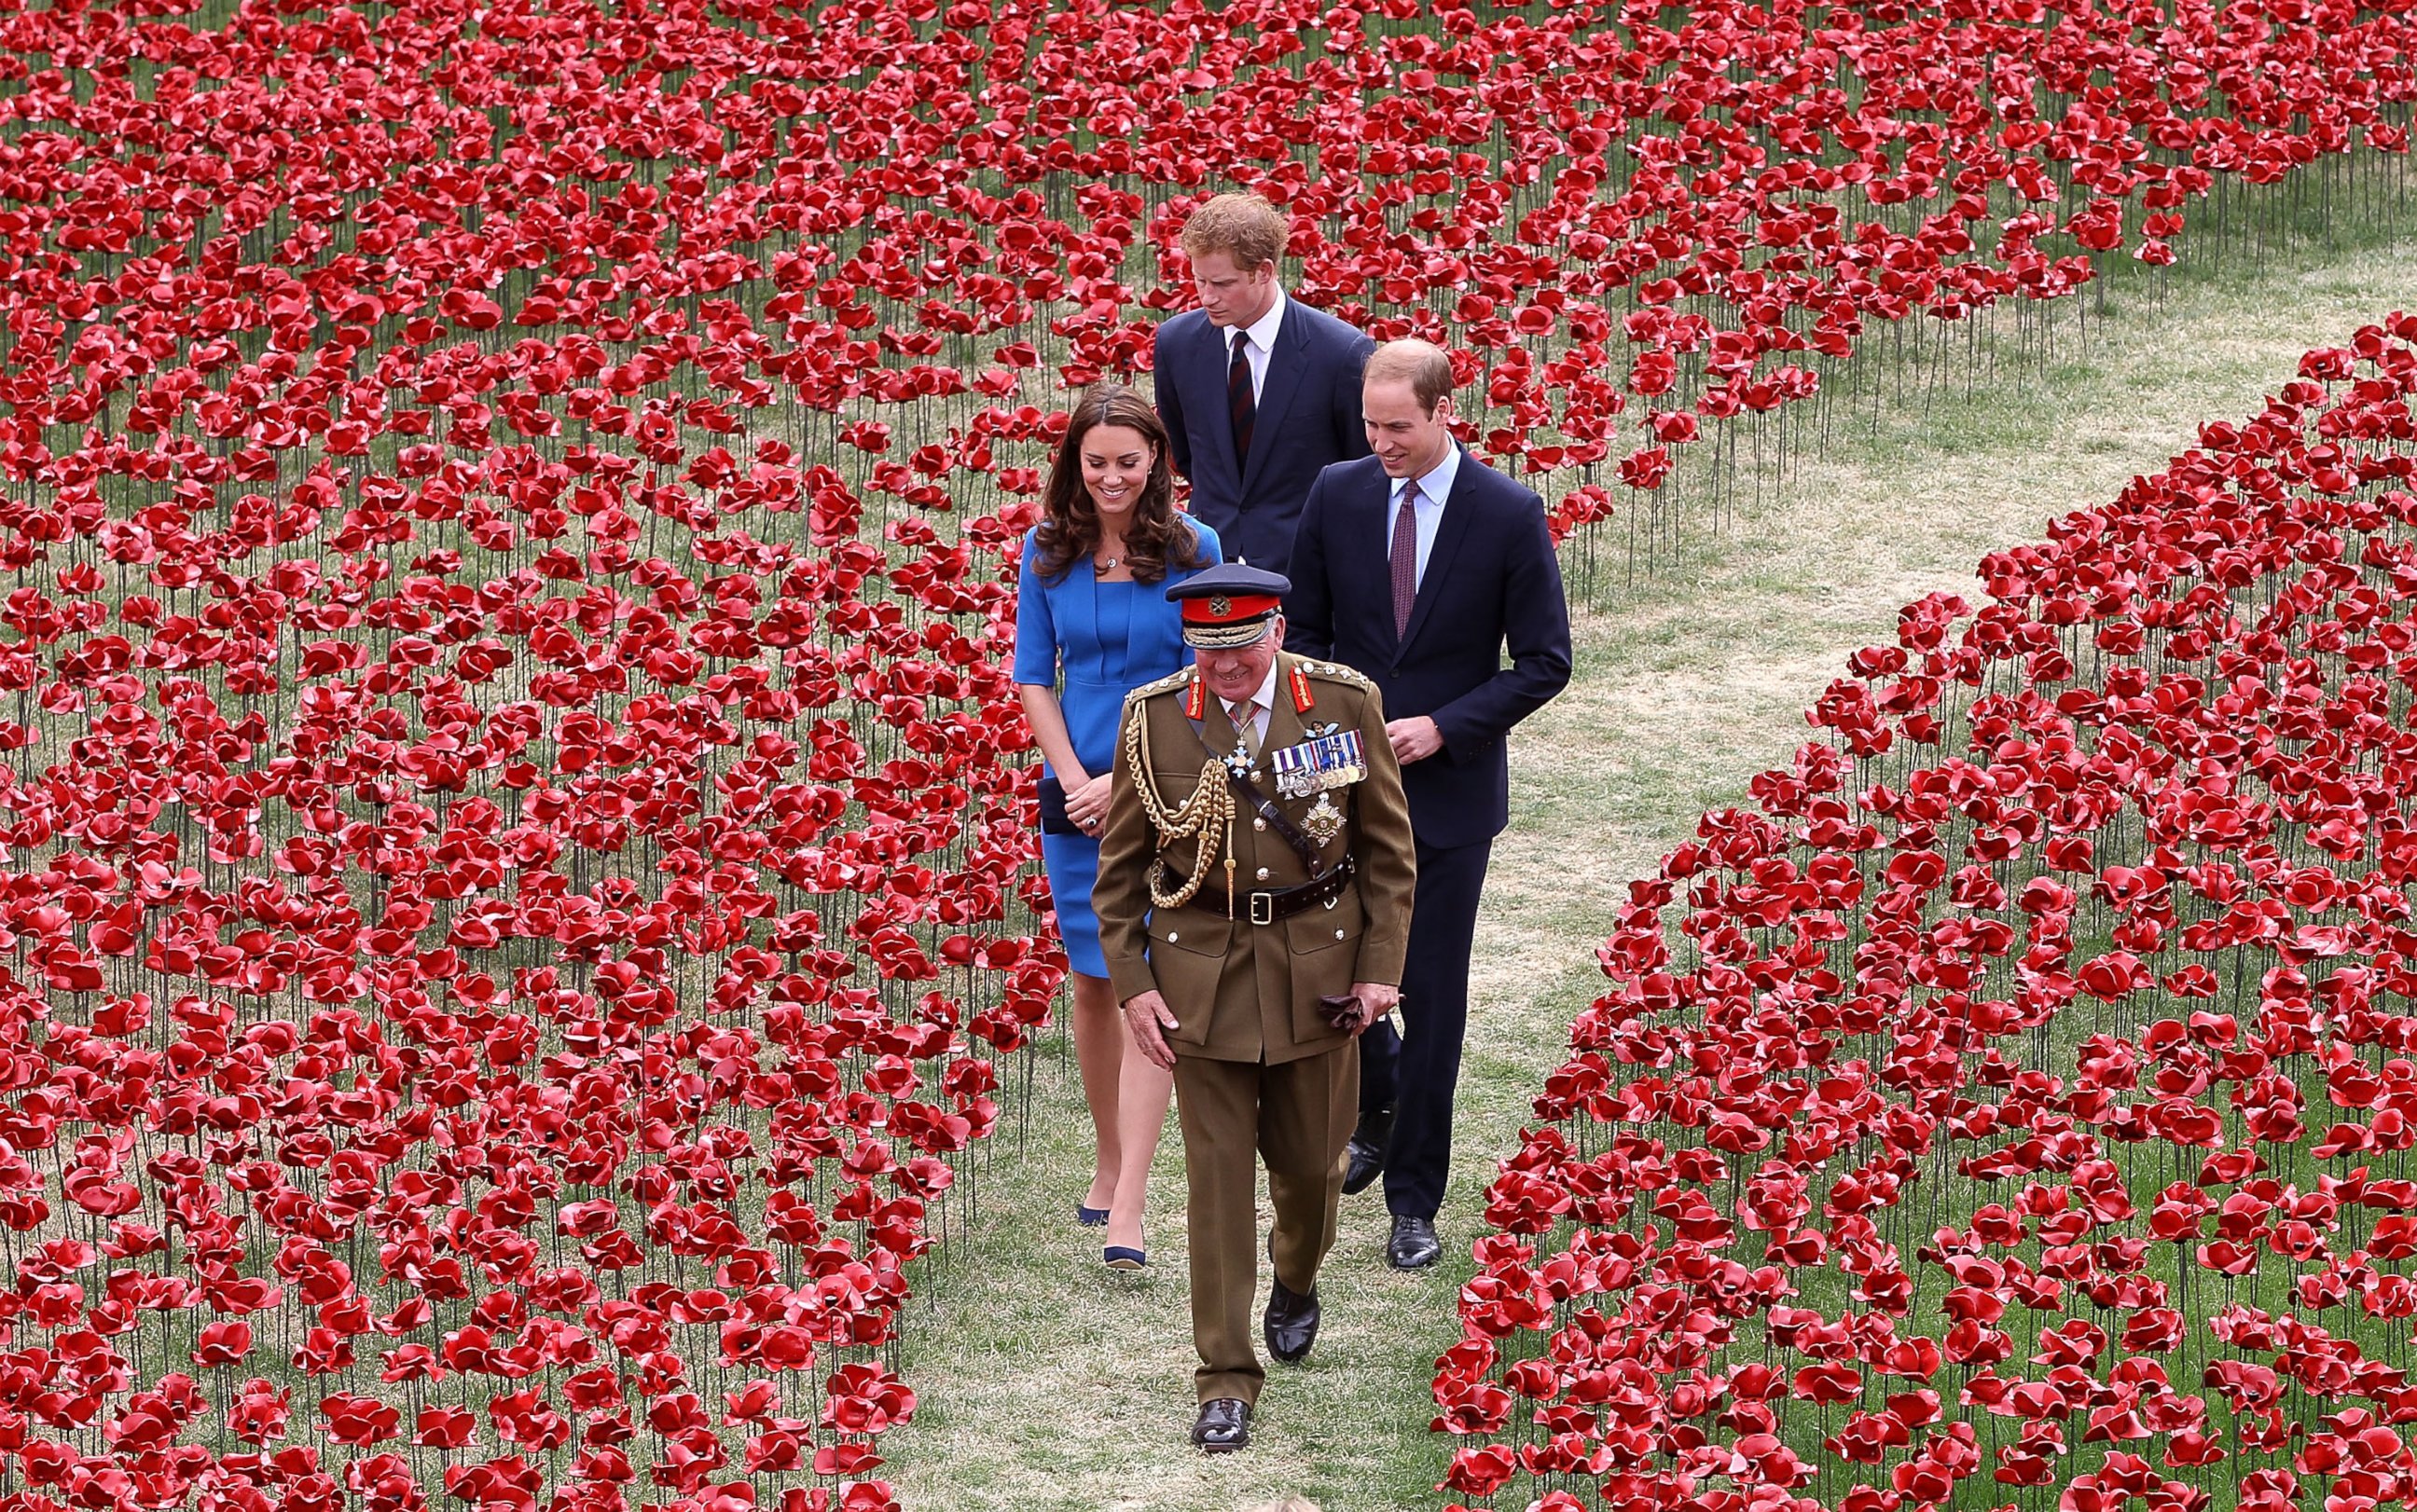 PHOTO: General The Lord Dannatt gives Prince Harry, Catherine, Duchess of Cambridge and Prince William, Duke of Cambridge a tour as they attend the ceramic poppy field of remembrance at Tower of London in London, England, August 5, 2014.